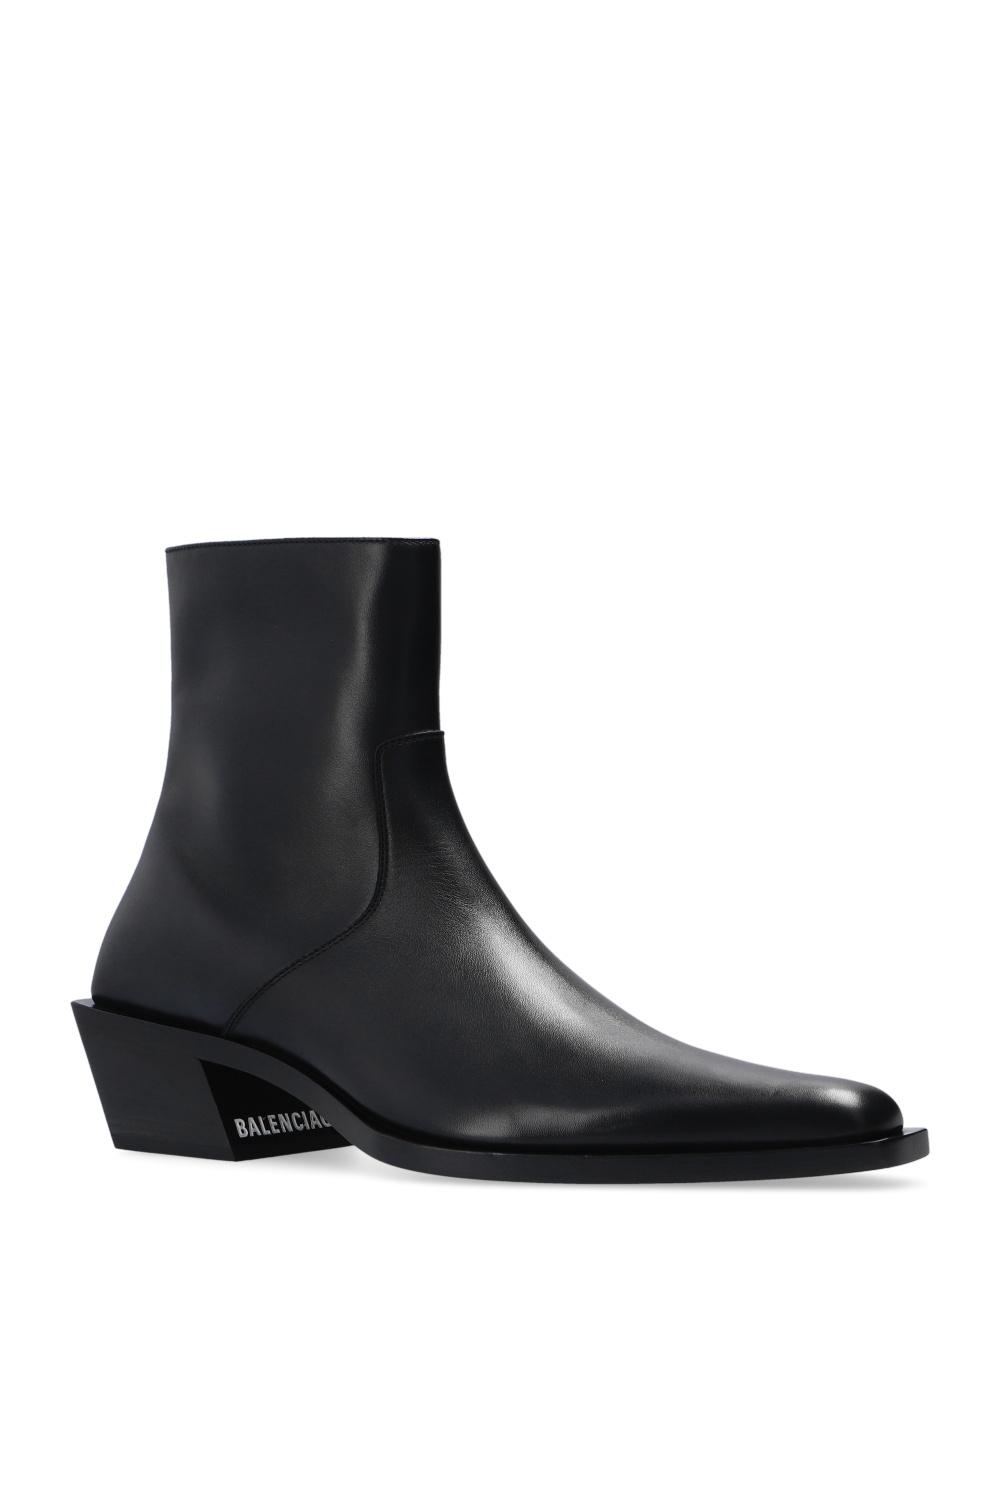 IetpShops | Men's shoes Chinese | Balenciaga 'Tiaga' leather ankle boots |  Depa-V2 Sandals in Nylon